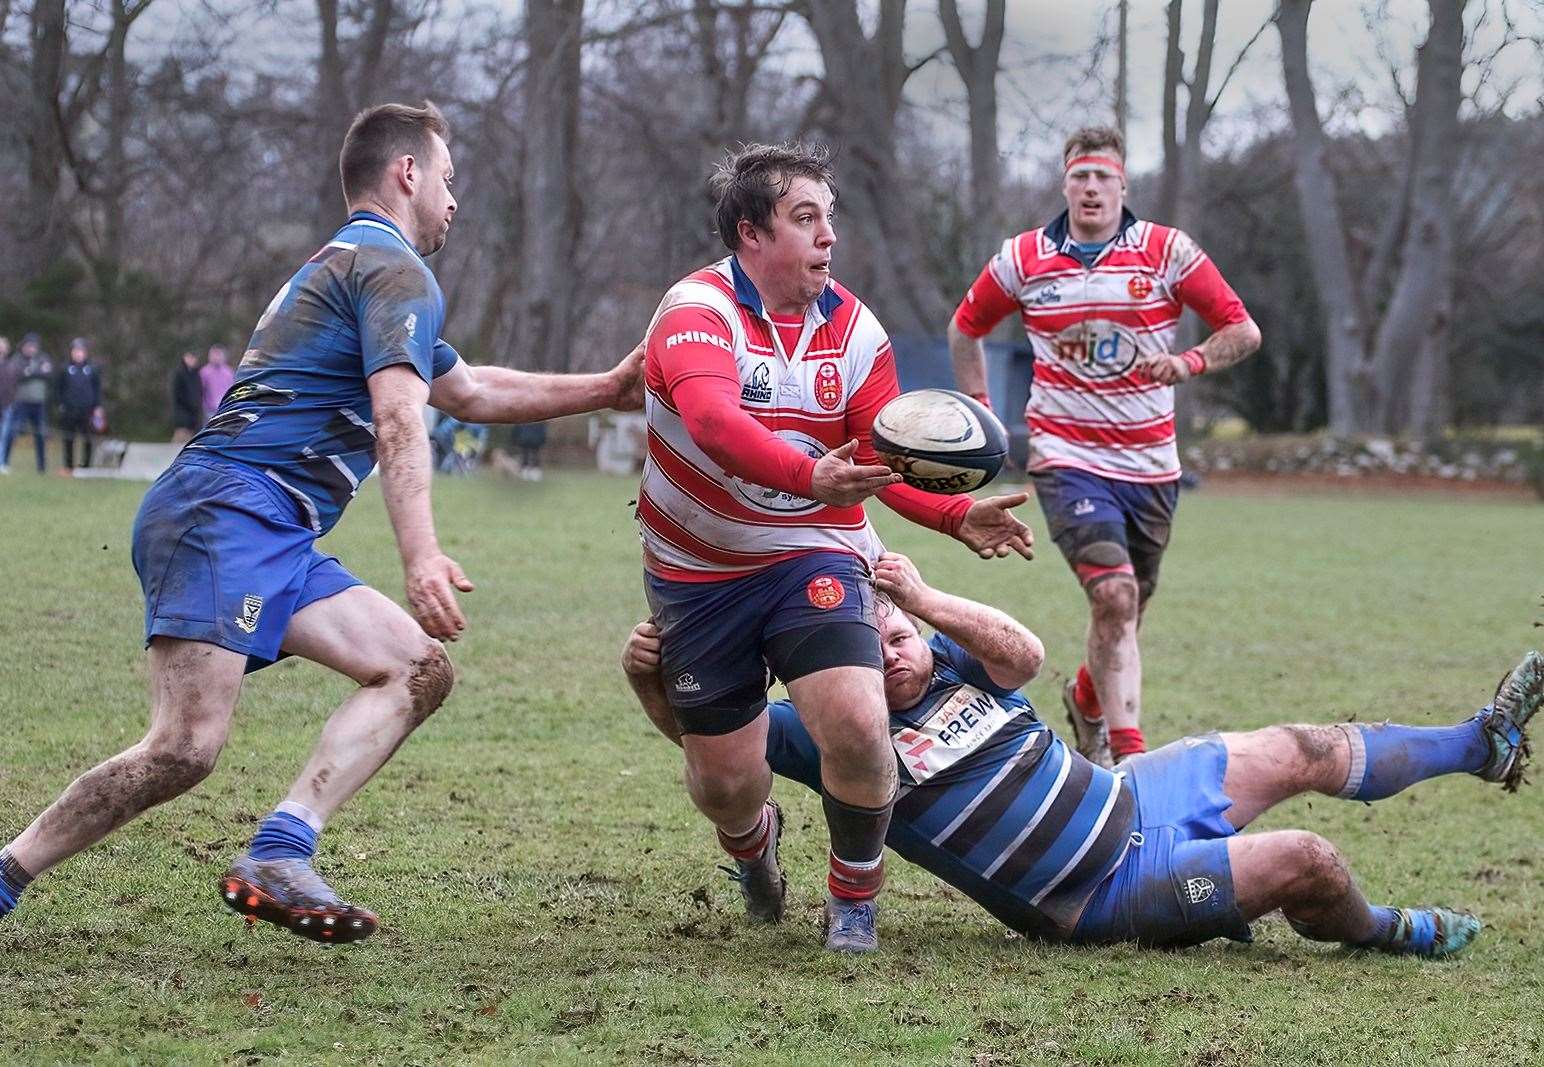 Cameron Hughes looks to offload in tackle. Hugh MacRae is in the background. Picture: John MacGregor